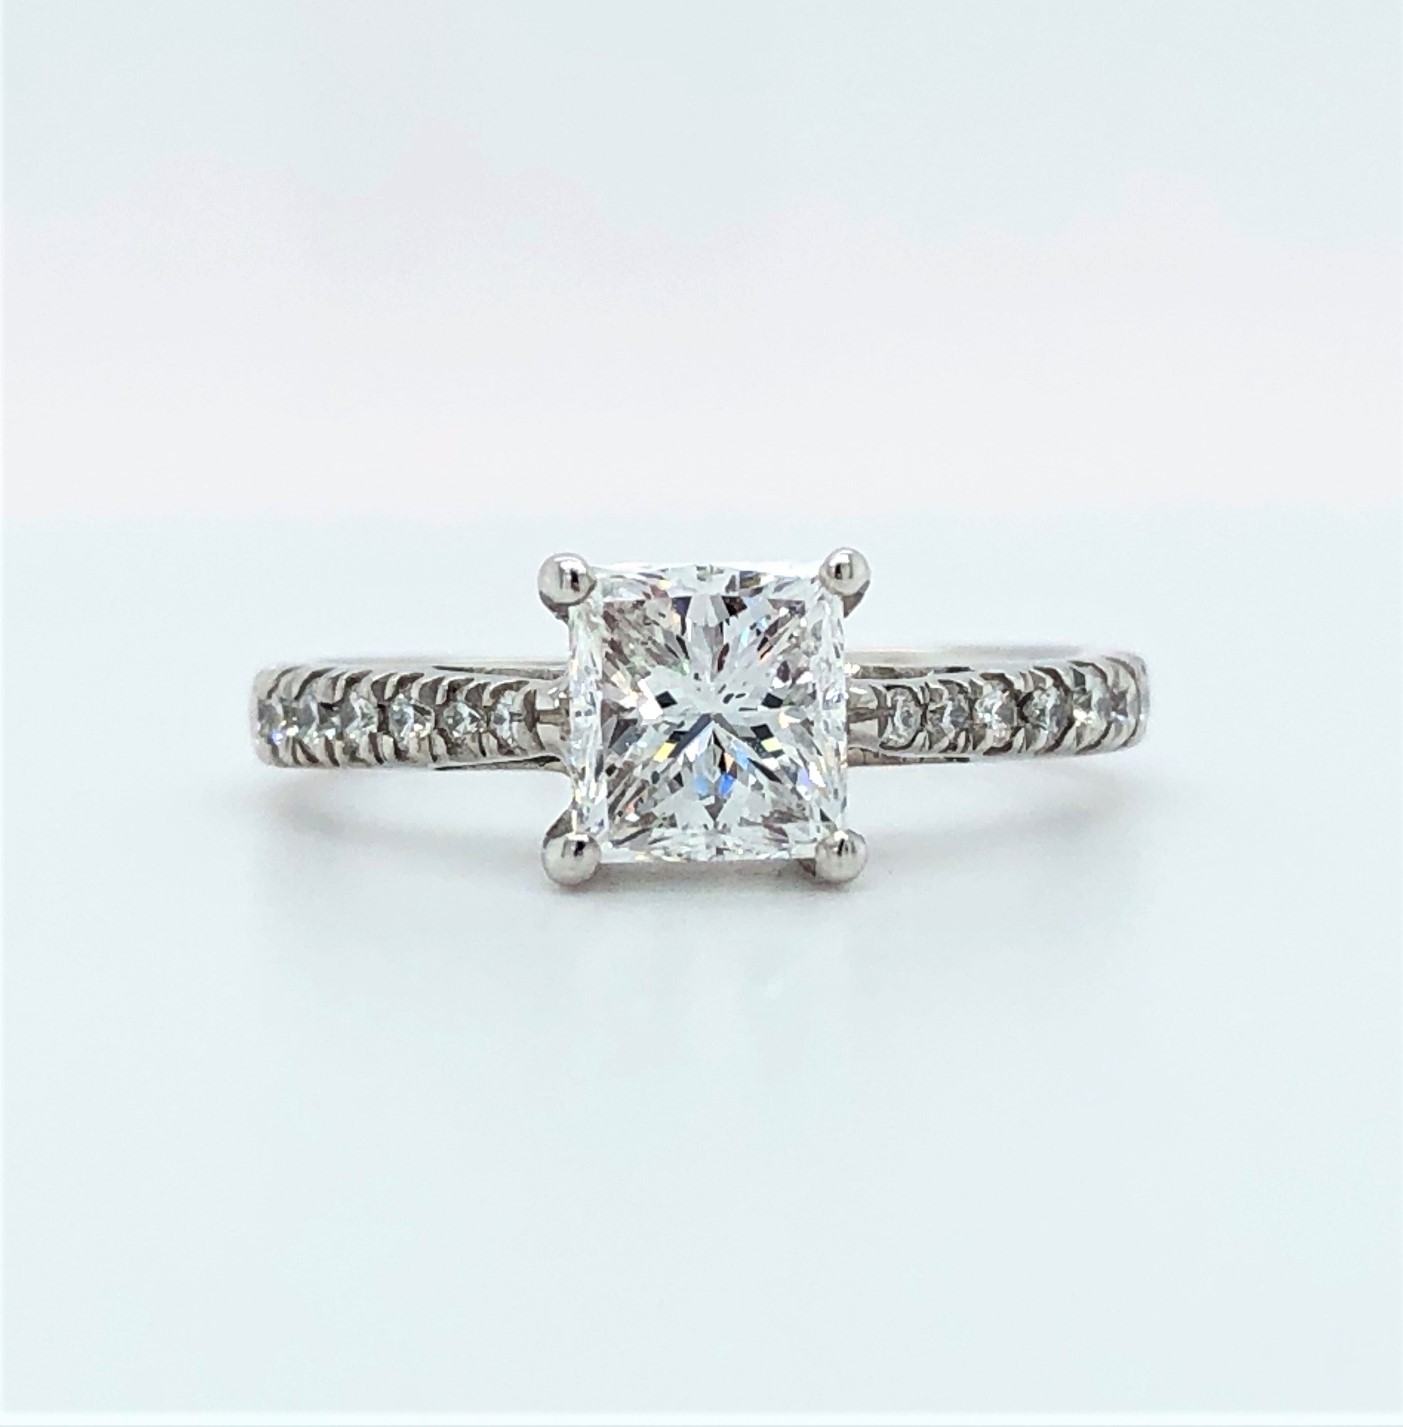 Platinum ring with 1ct Diamond centre (D/SI1) and 0.17cts diamonds on shoulders, weight 3.14g and